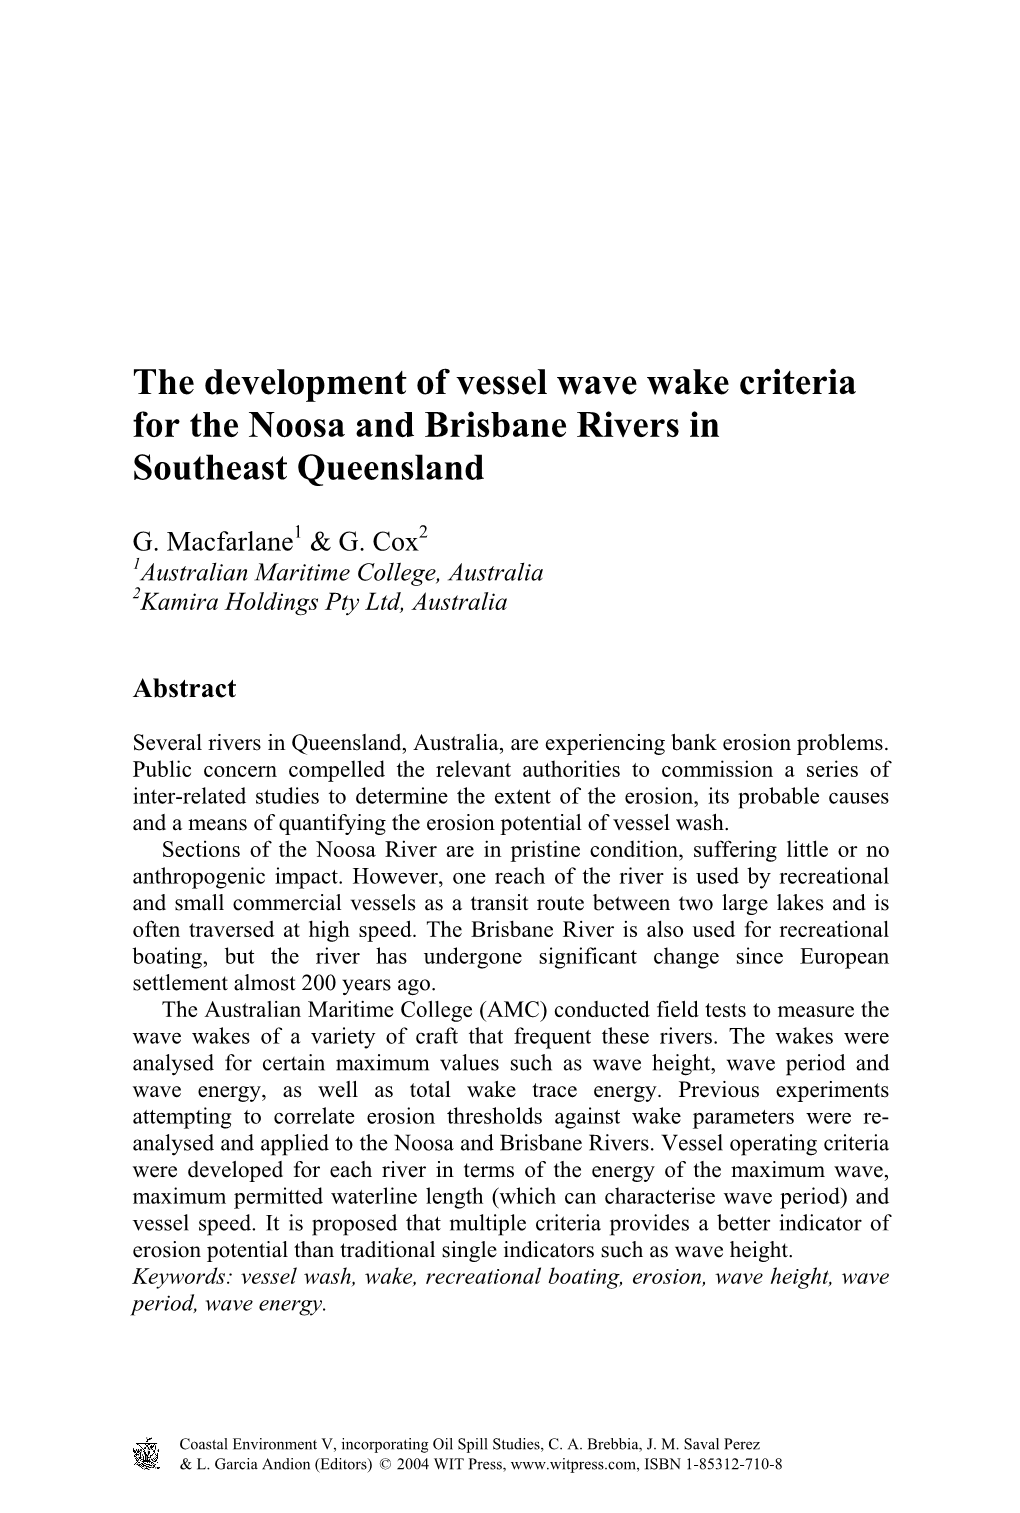 The Development of Vessel Wave Wake Criteria for the Noosa and Brisbane Rivers in Southeast Queensland